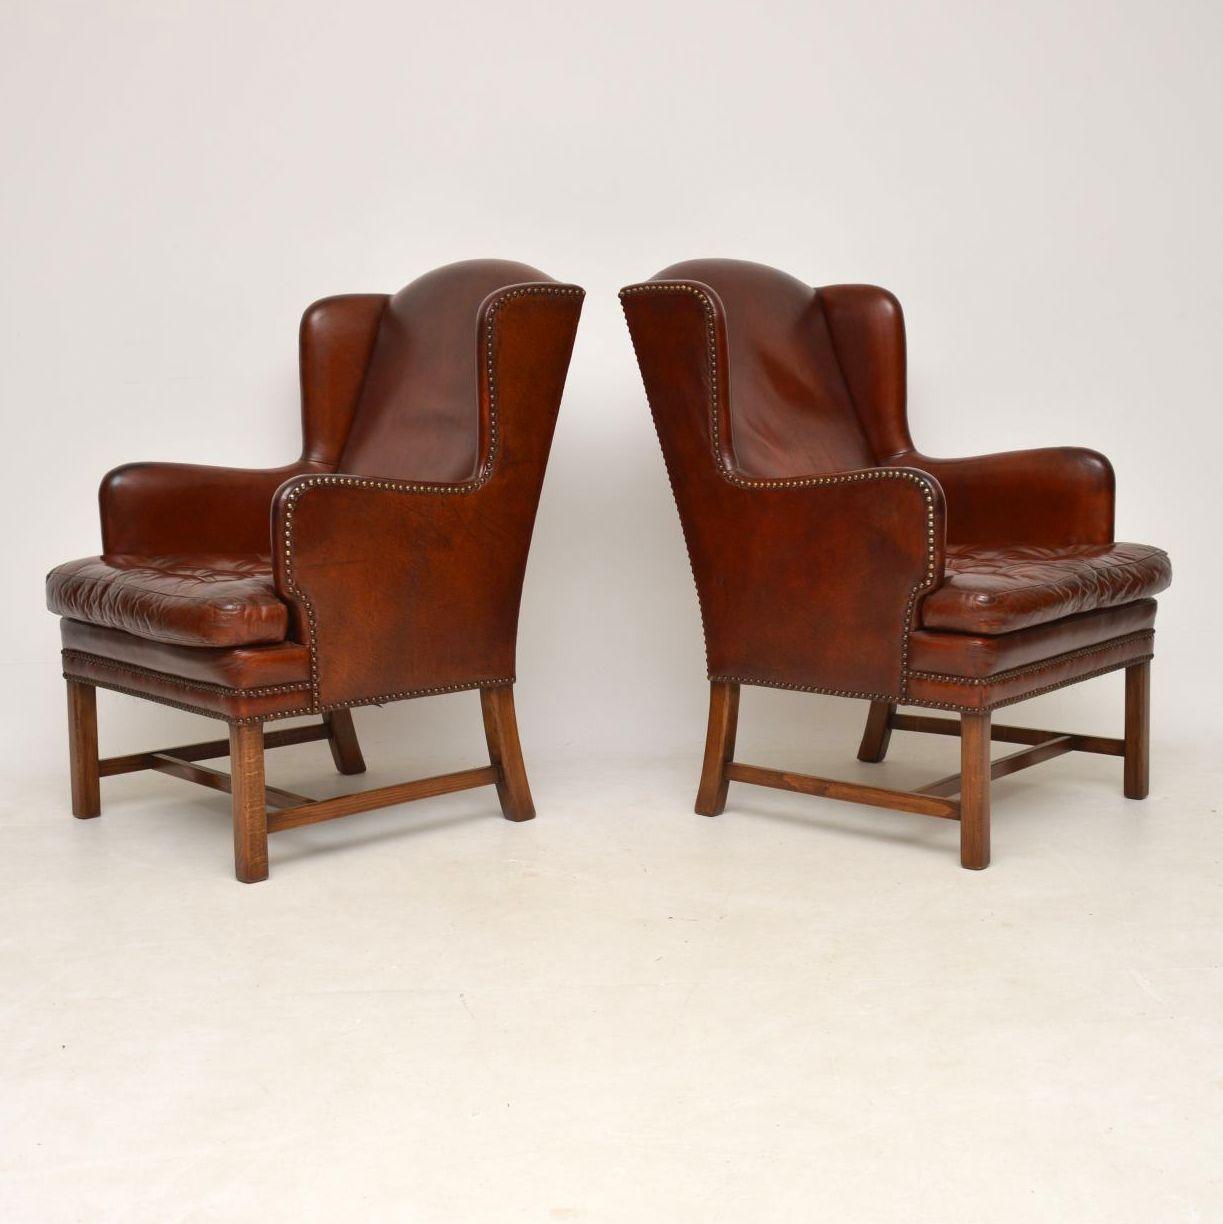 Pair of antique Swedish leather wing armchairs in good original condition and with naturally aged original leather. The leather has a lovely rich color, with hand tacking and buttoned seat cushions. These armchairs are very sturdy and have cross